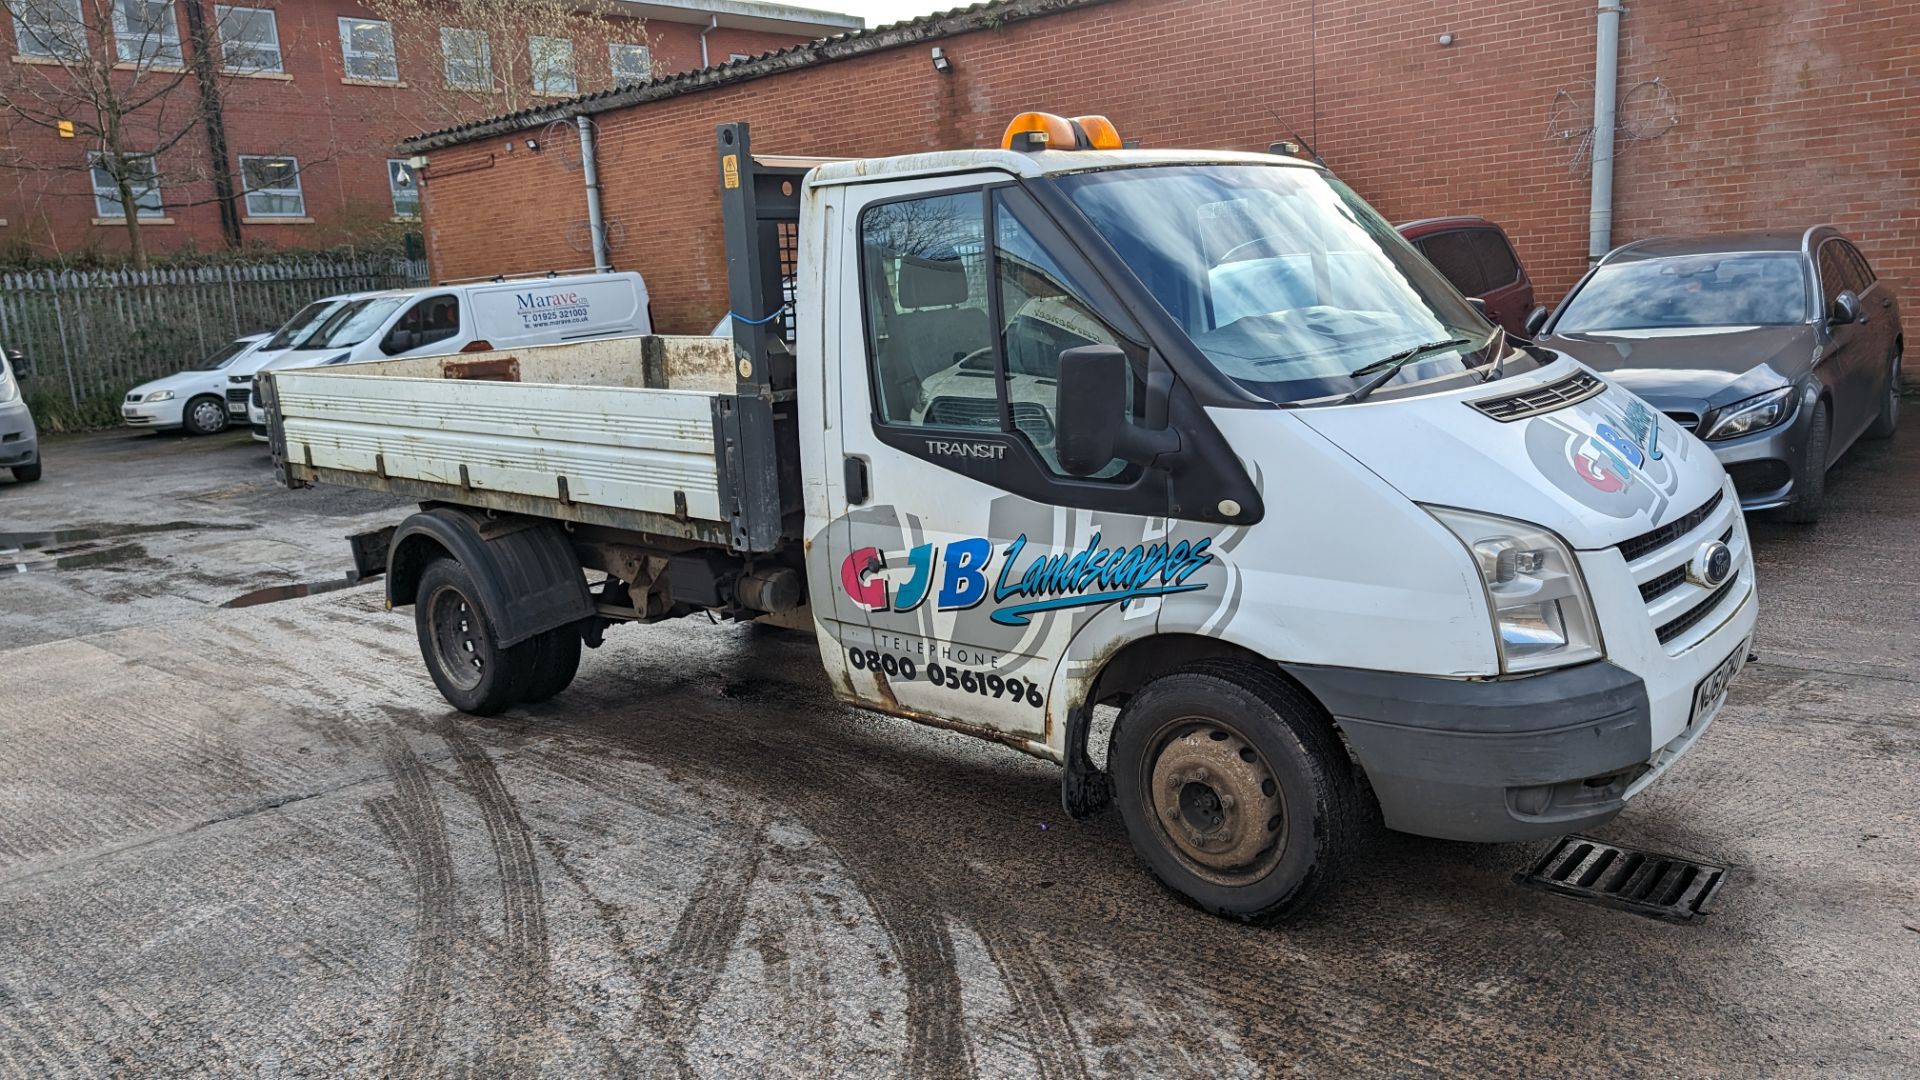 2011 Ford Transit Dropside Tipper - Image 9 of 24